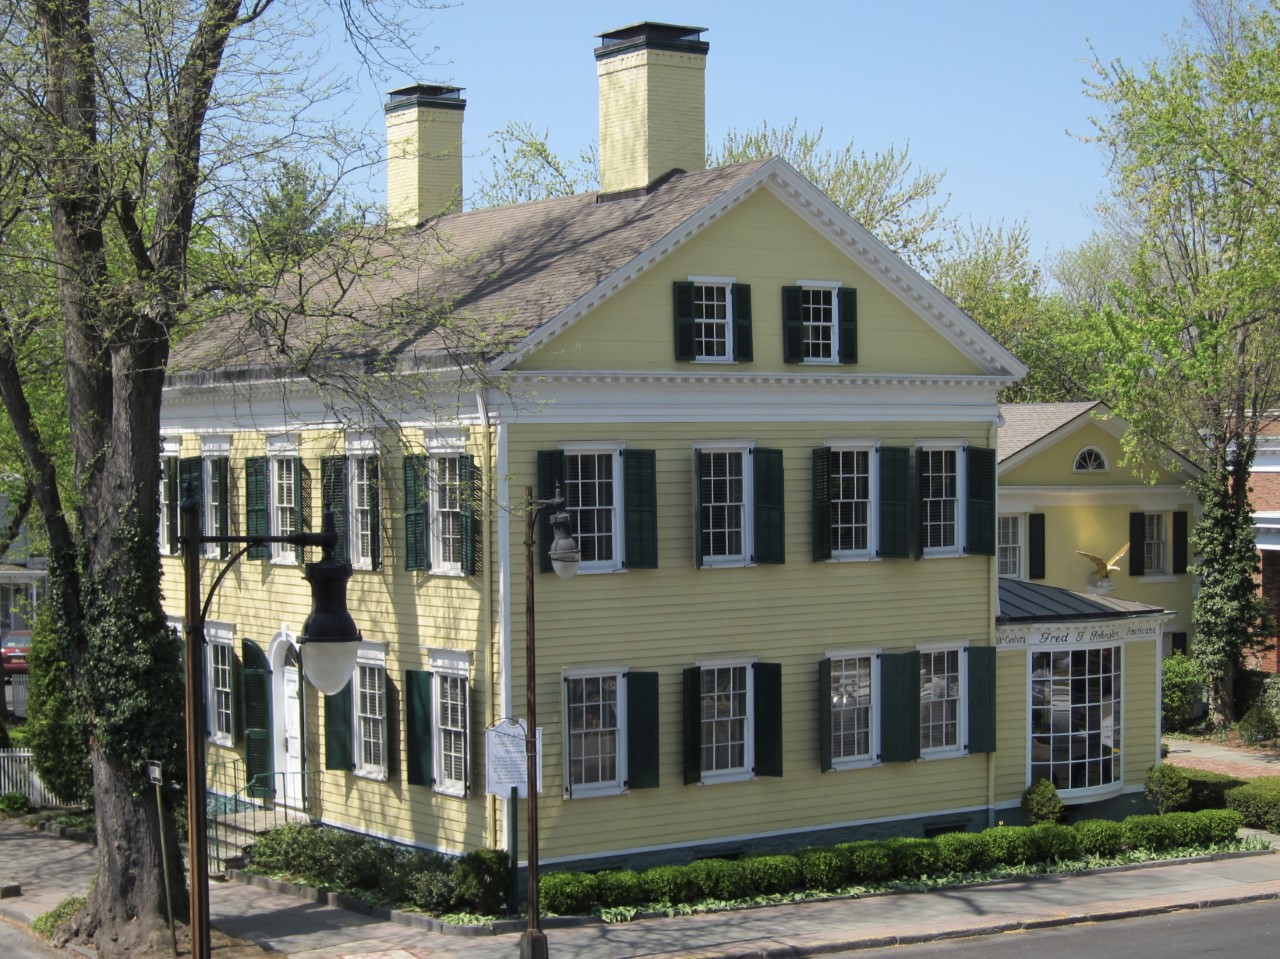 large, yellow, two-story clapboard house